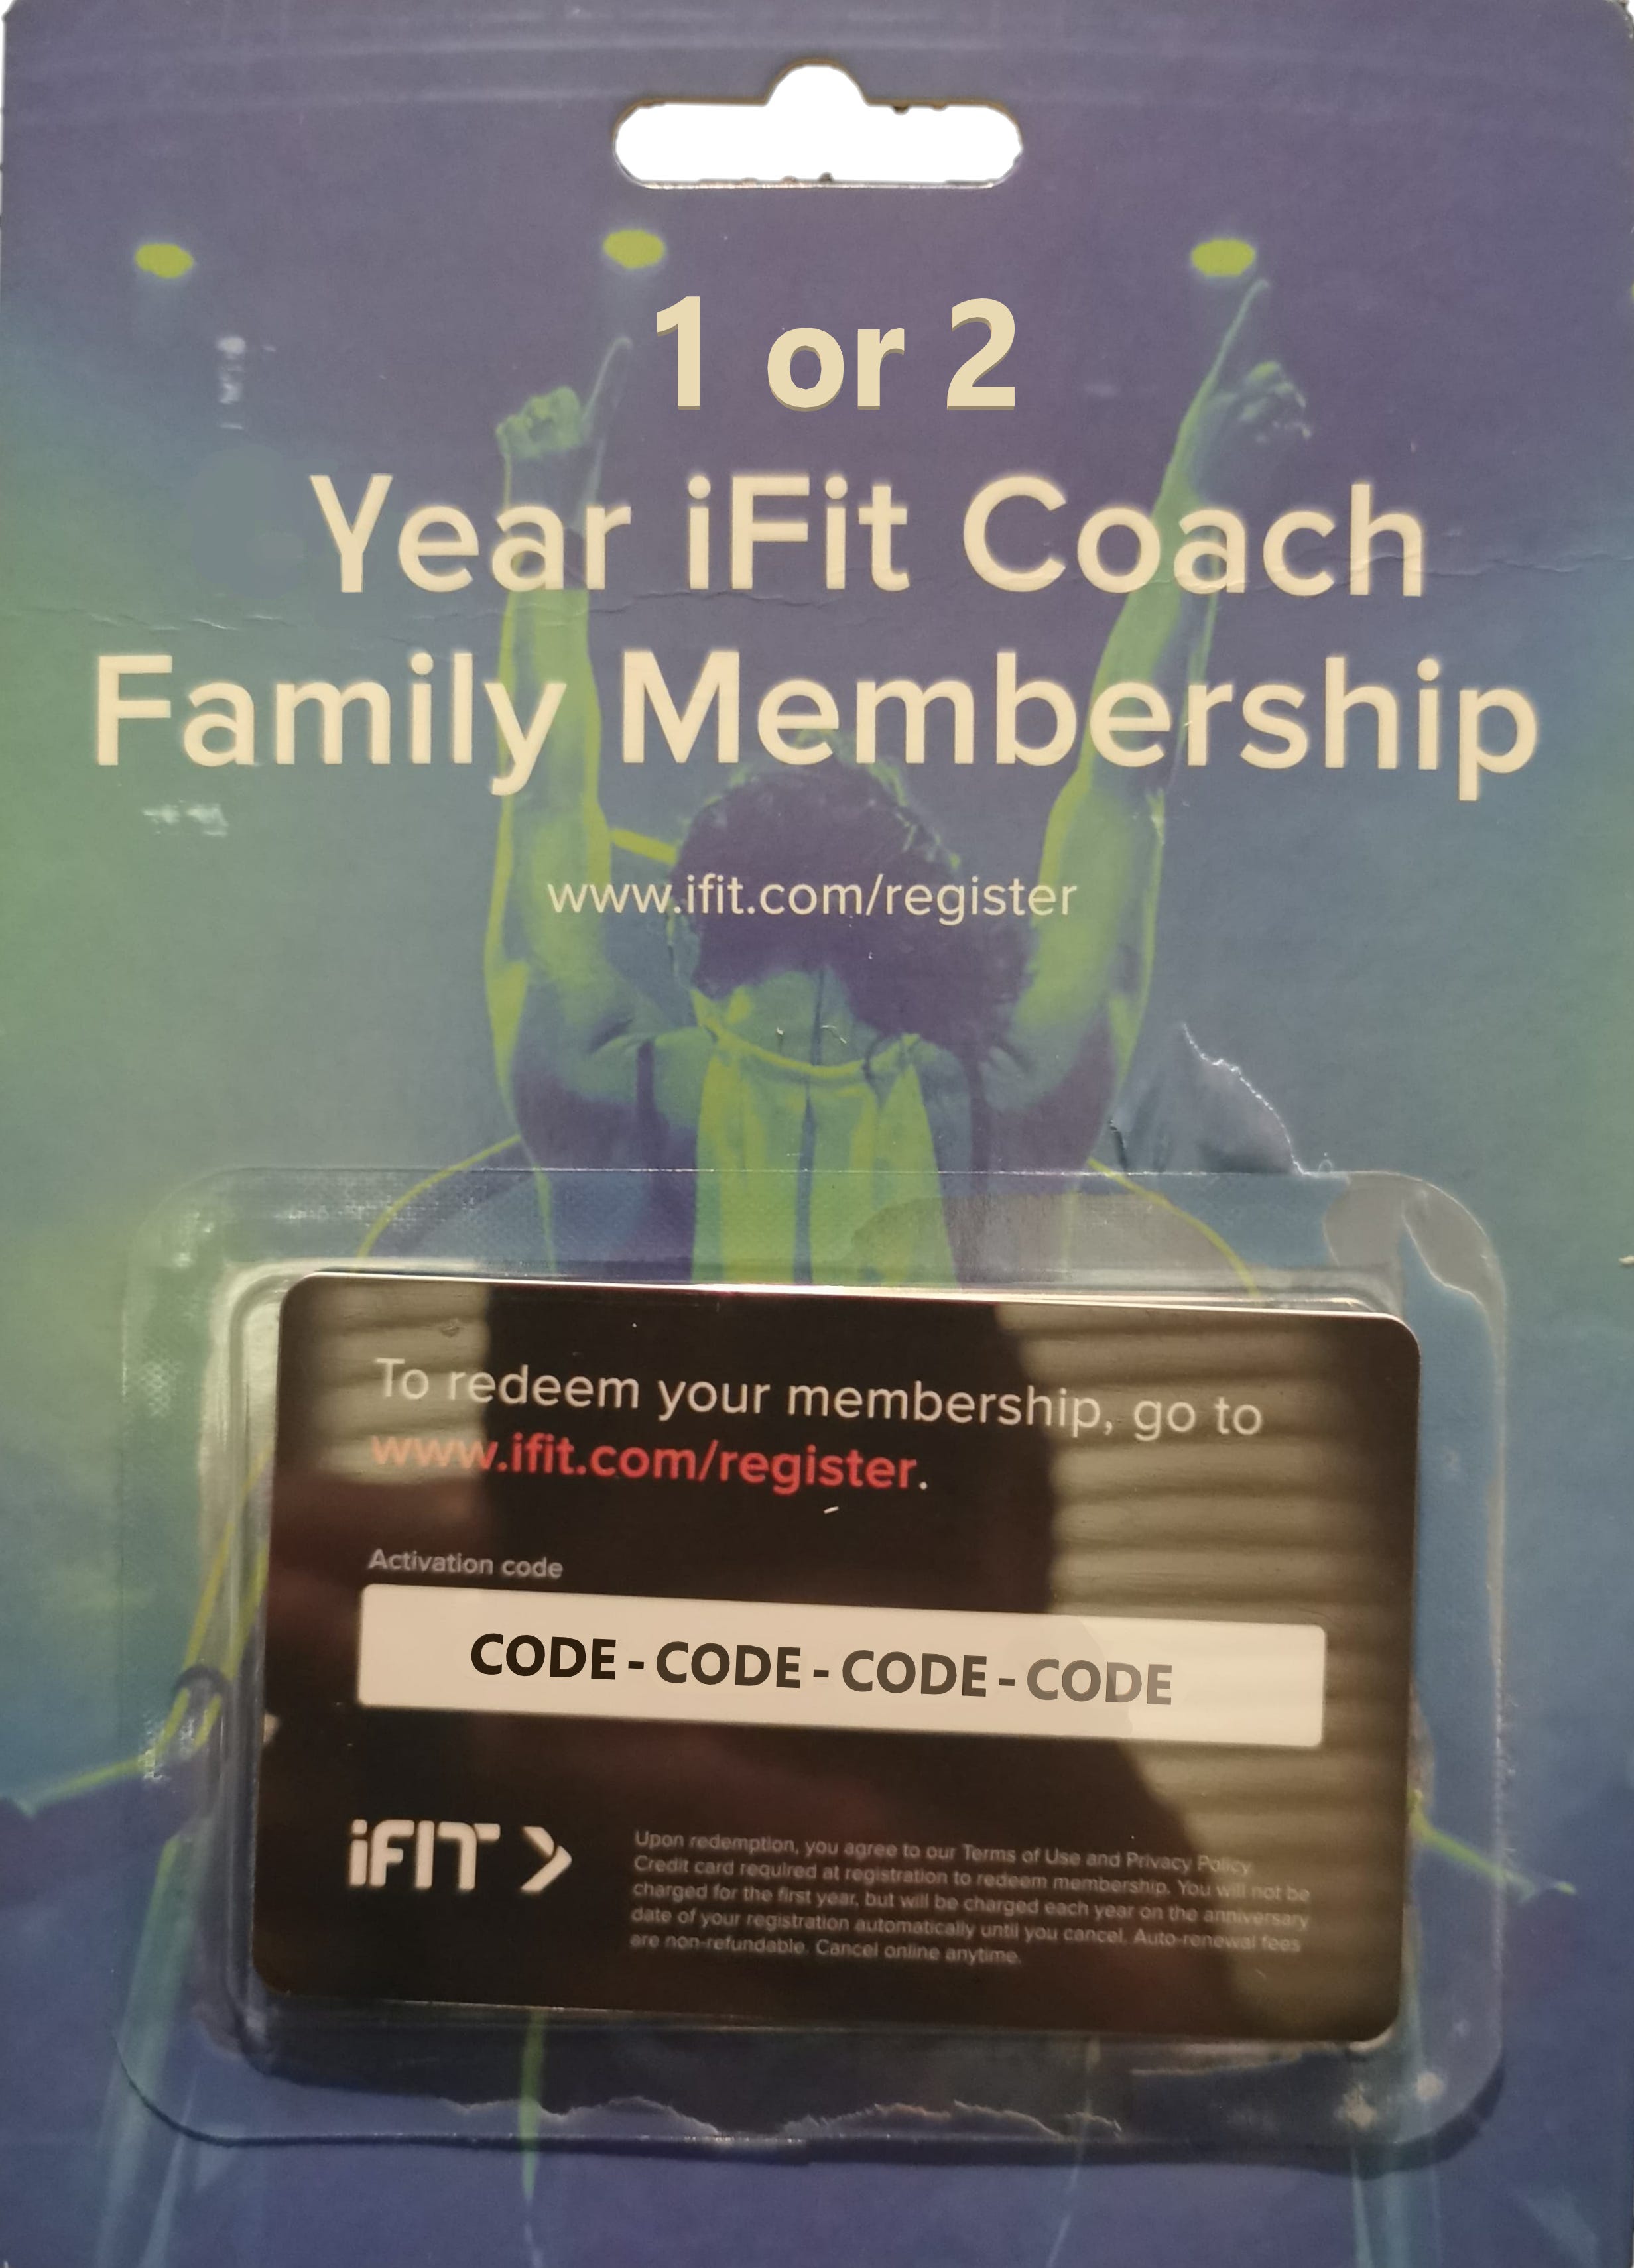 IFIT MEMBERSHIP CODES EXPLAINED.. by Nelson Munoz